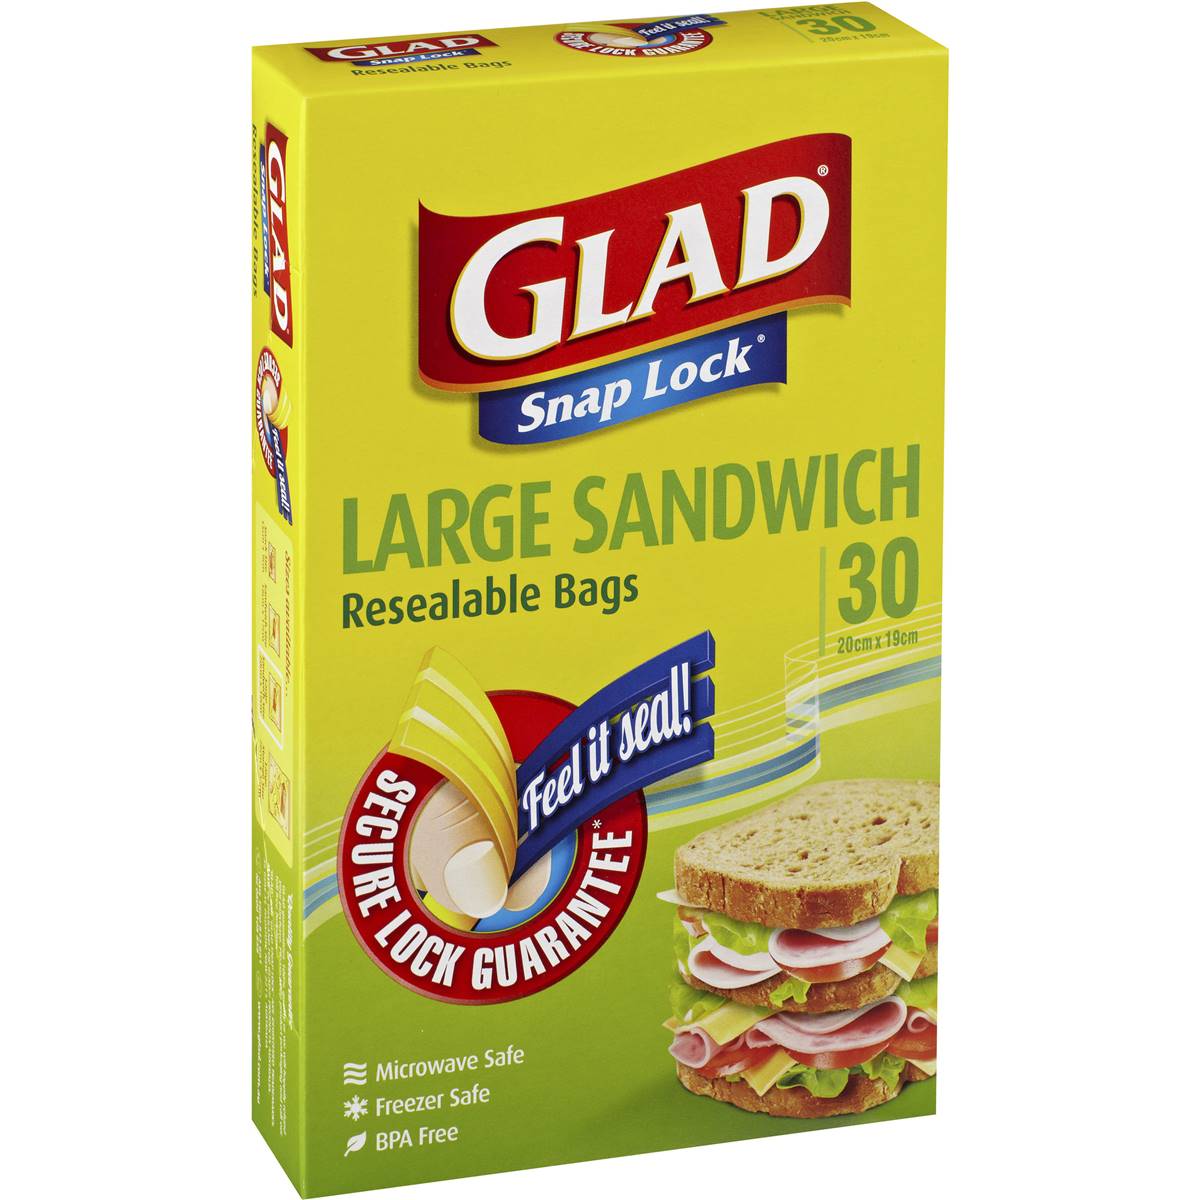 Glad Snap Lock Resealable Large Sandwich Bags 30 Pack